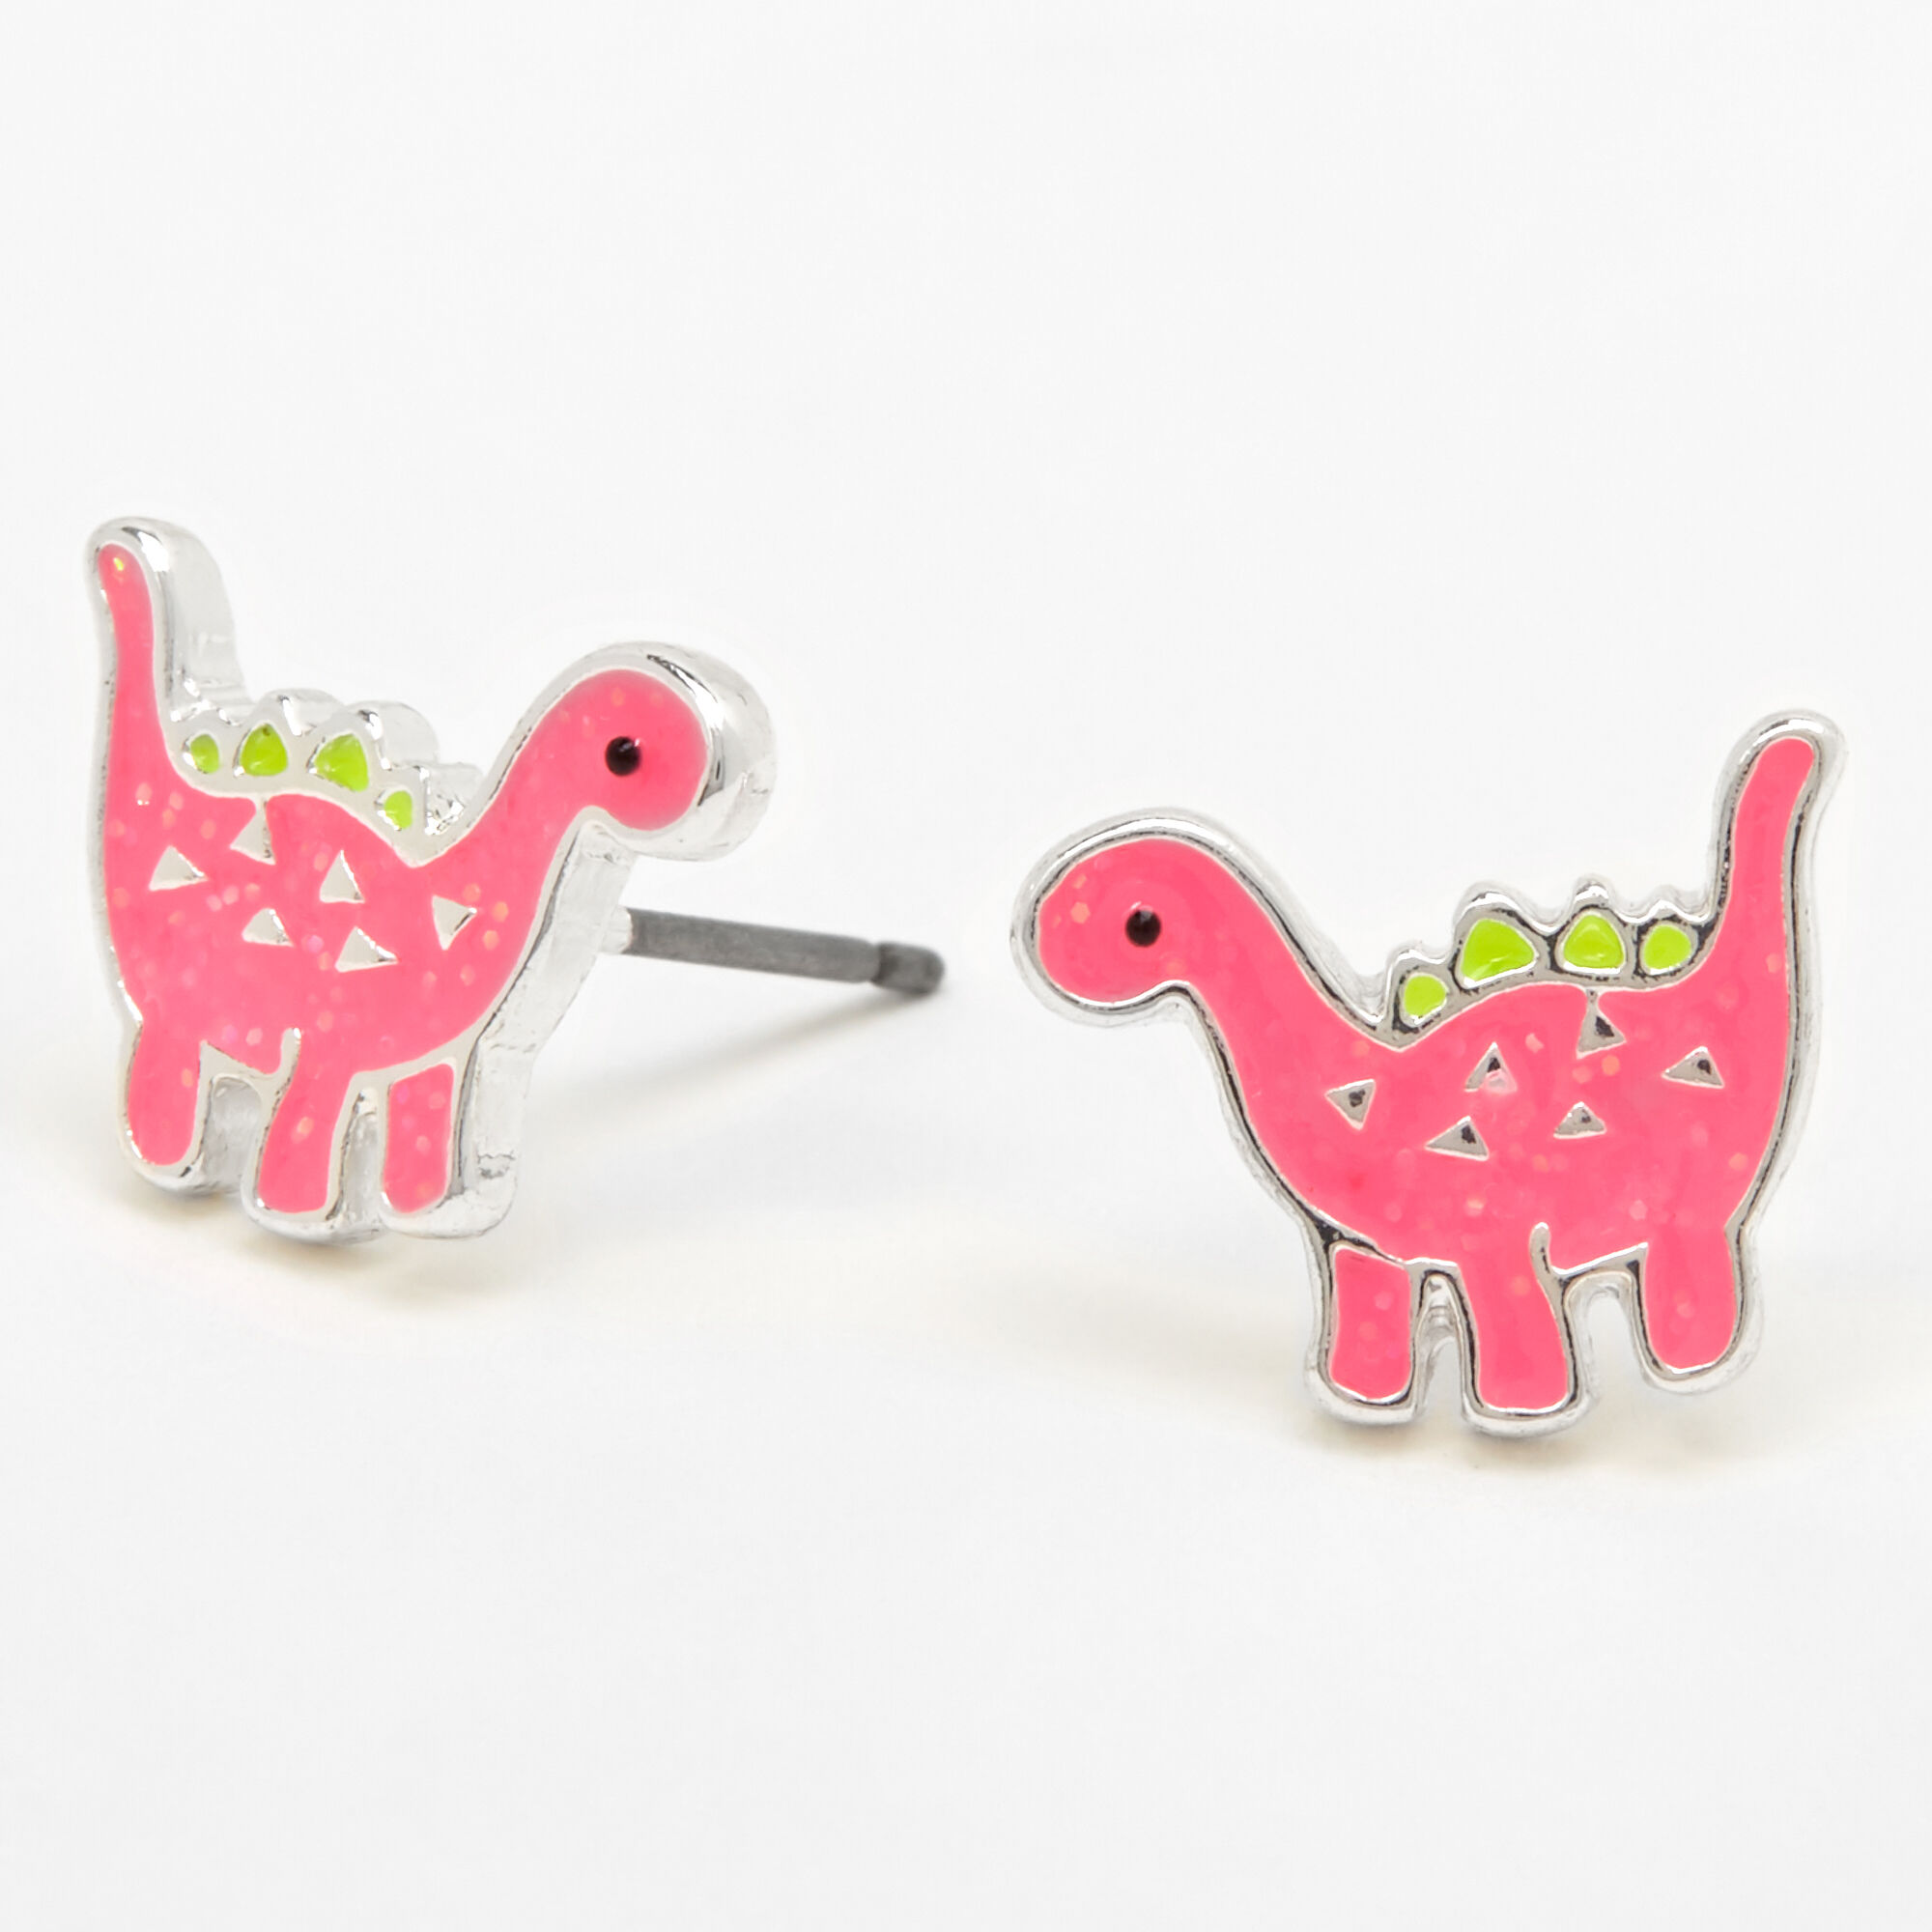 Cute little T-rex earrings for any dino occasion